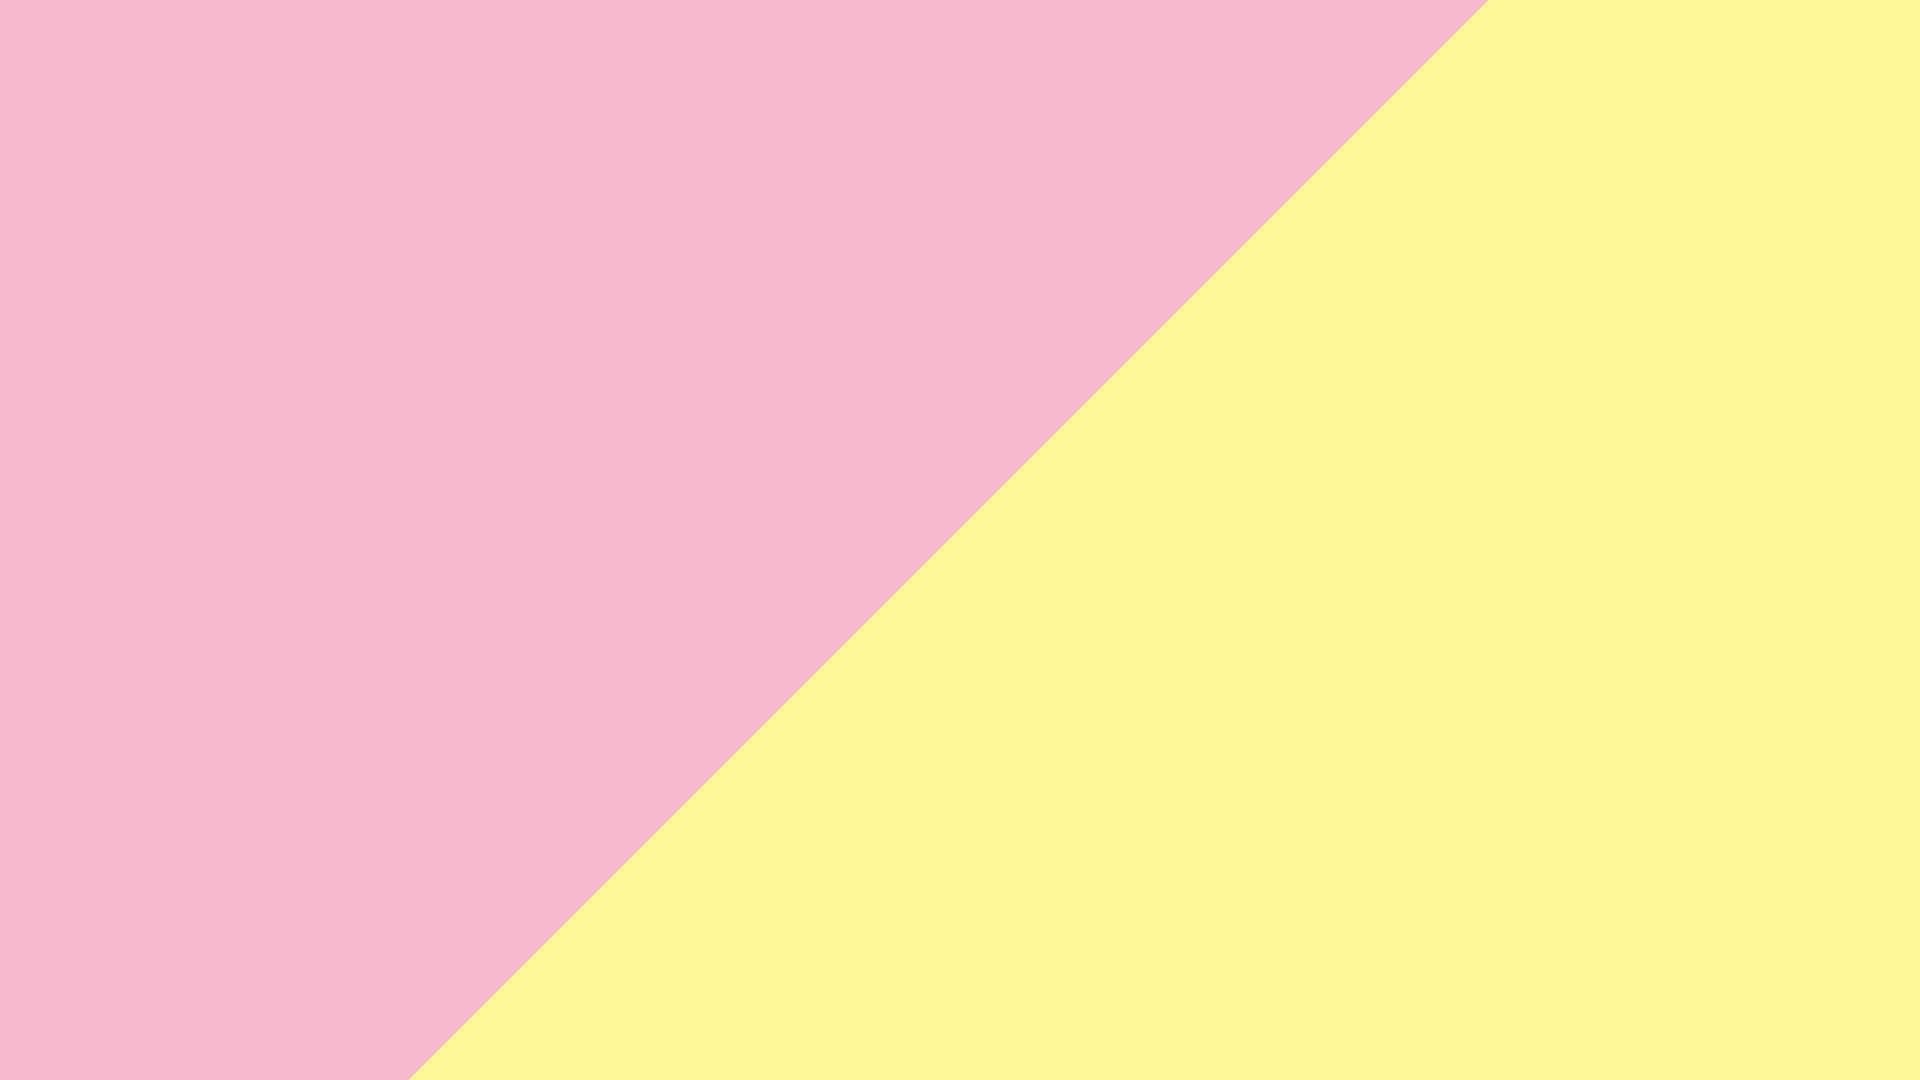 A Pink And Yellow Triangle With A Yellow Background Wallpaper